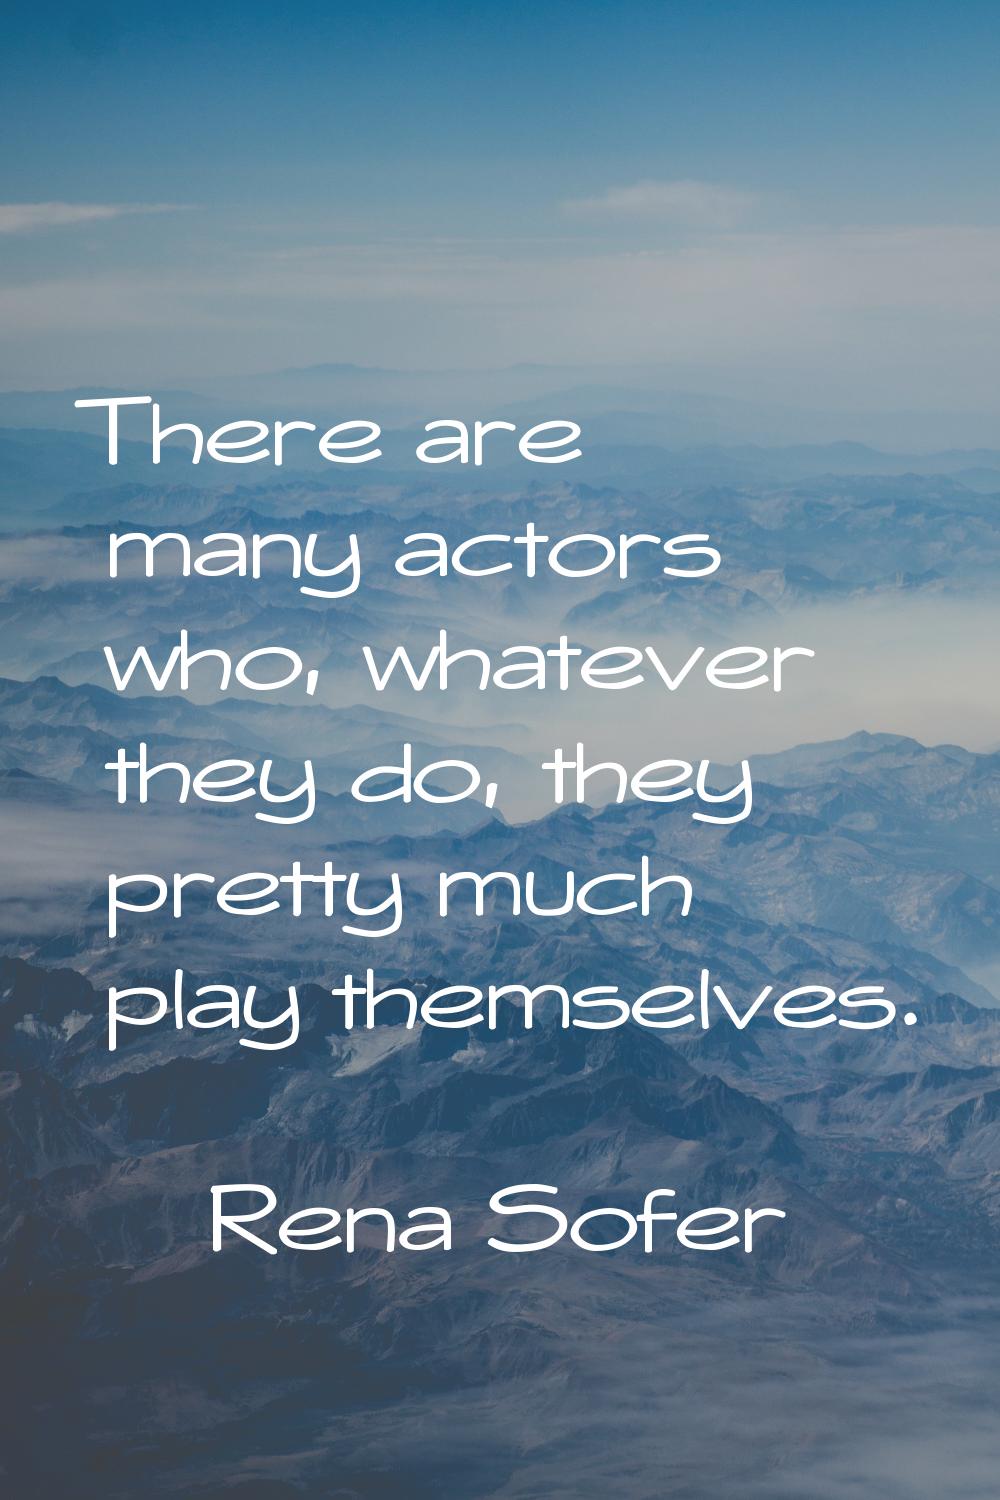 There are many actors who, whatever they do, they pretty much play themselves.